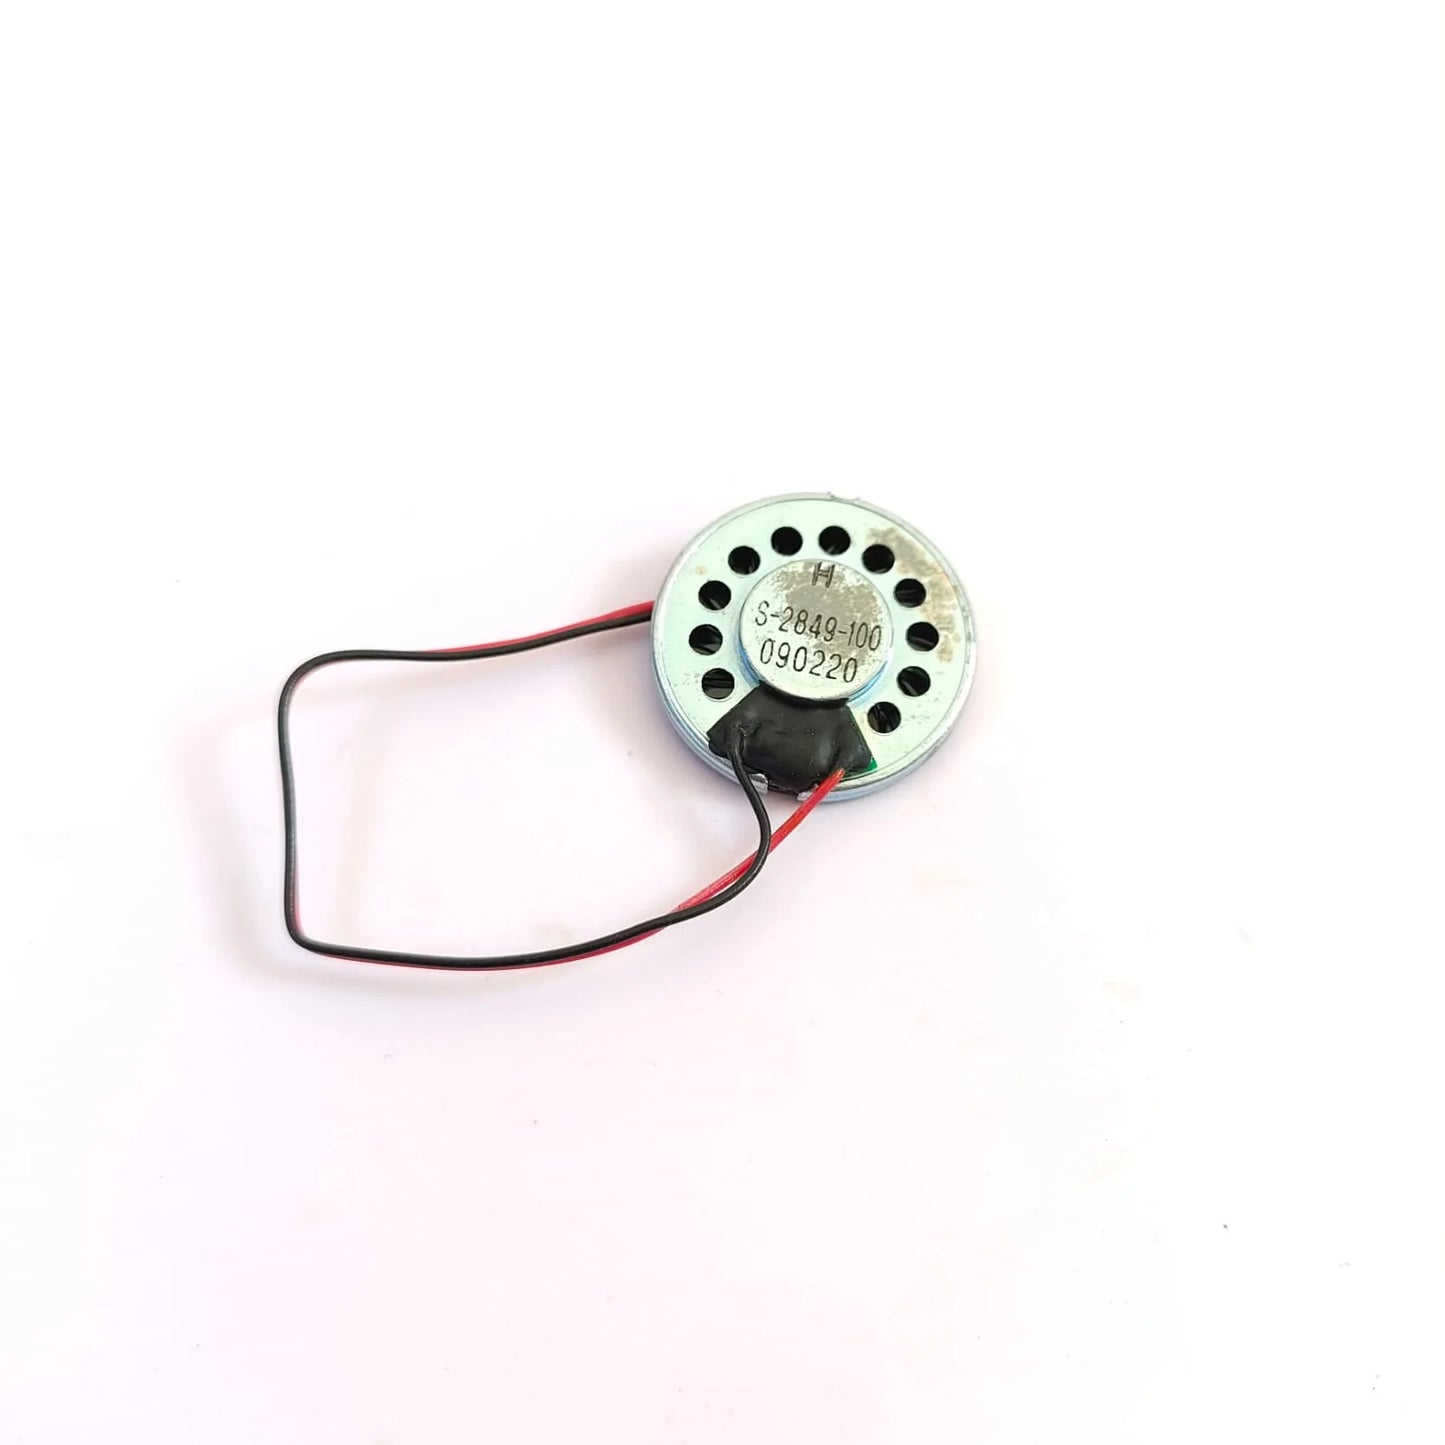 Toy Mobile Phone Speaker for Science Project (Buy 4 & Get Tip-Top Button)